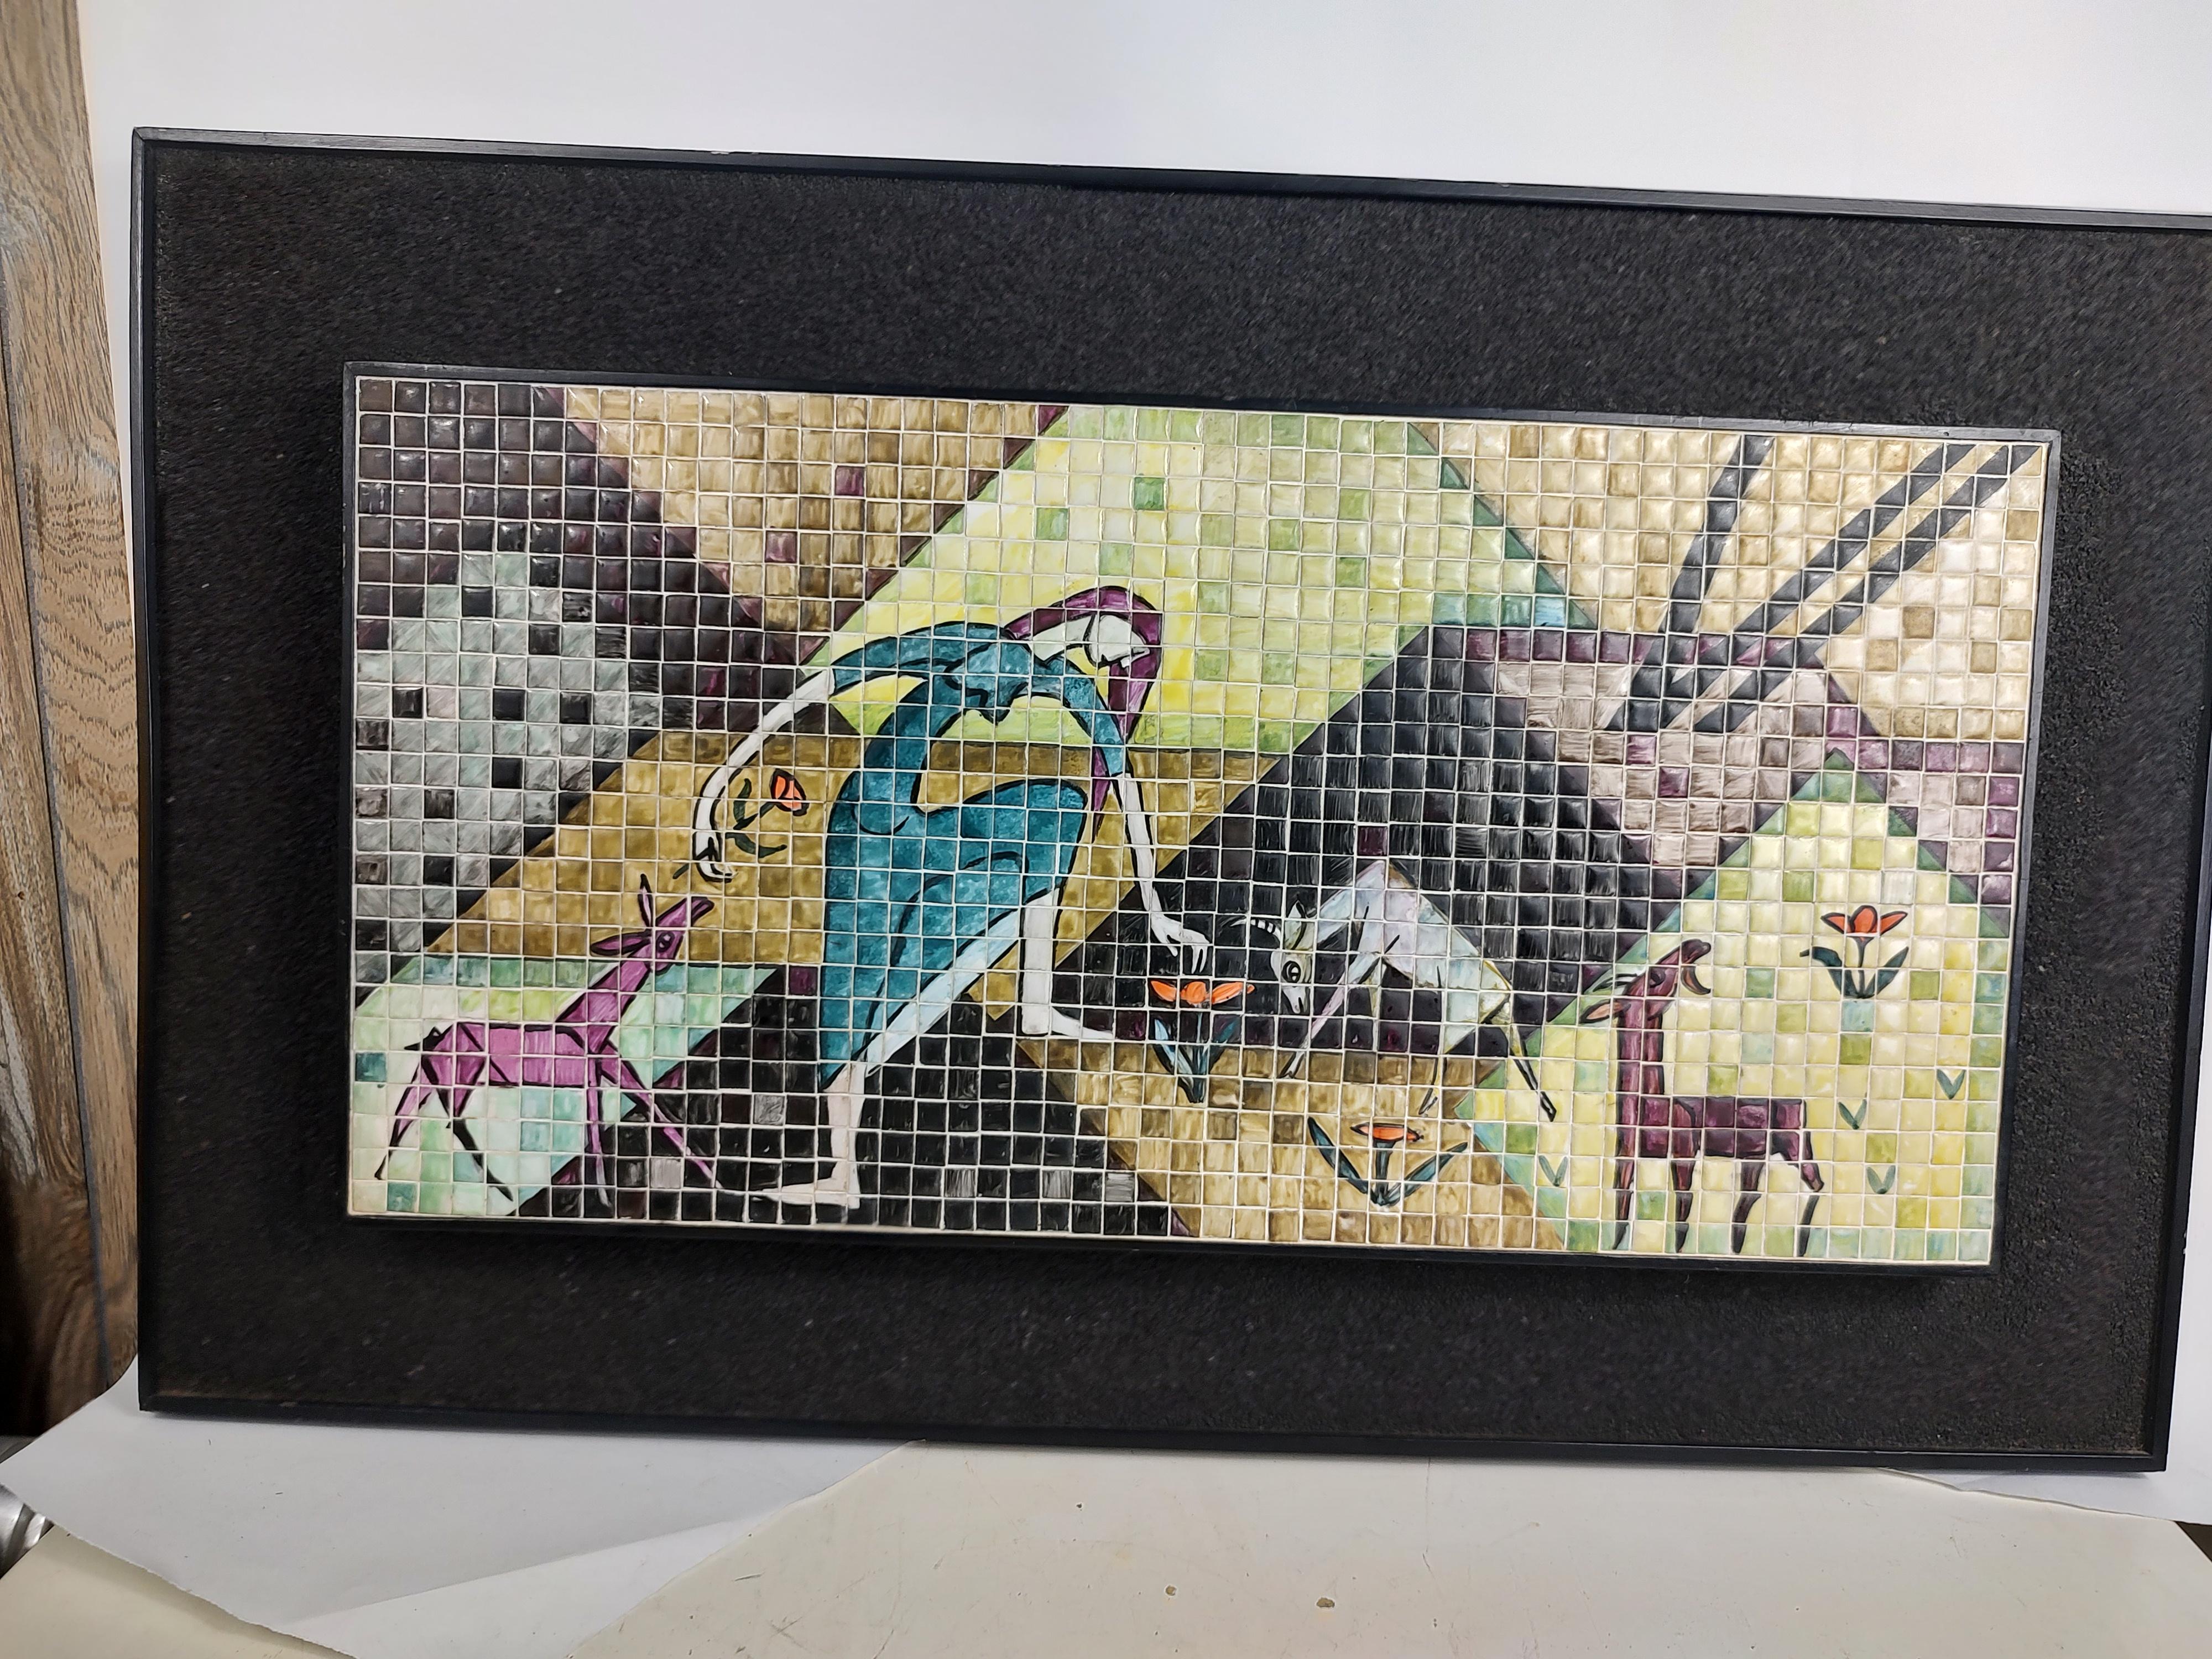 Mid-20th Century Mid-Century Modern Sculptural Framed Mosaic Tile Art of Woman with Goats For Sale